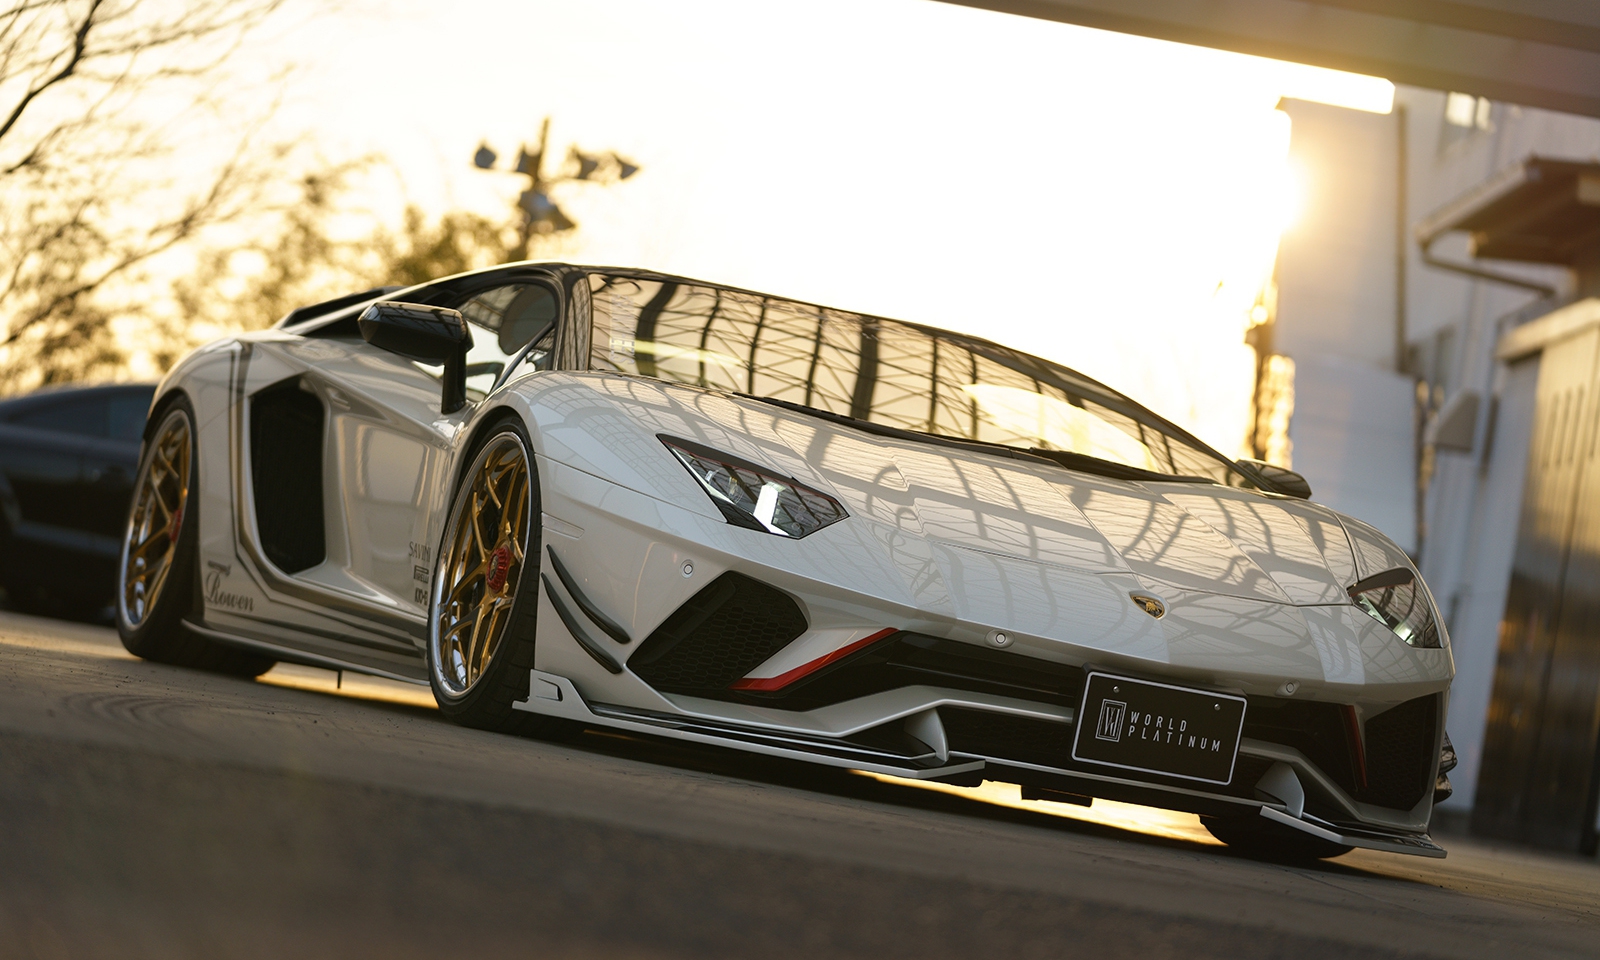 Check our price and buy Rowen body kit for Lamborghini Aventador S